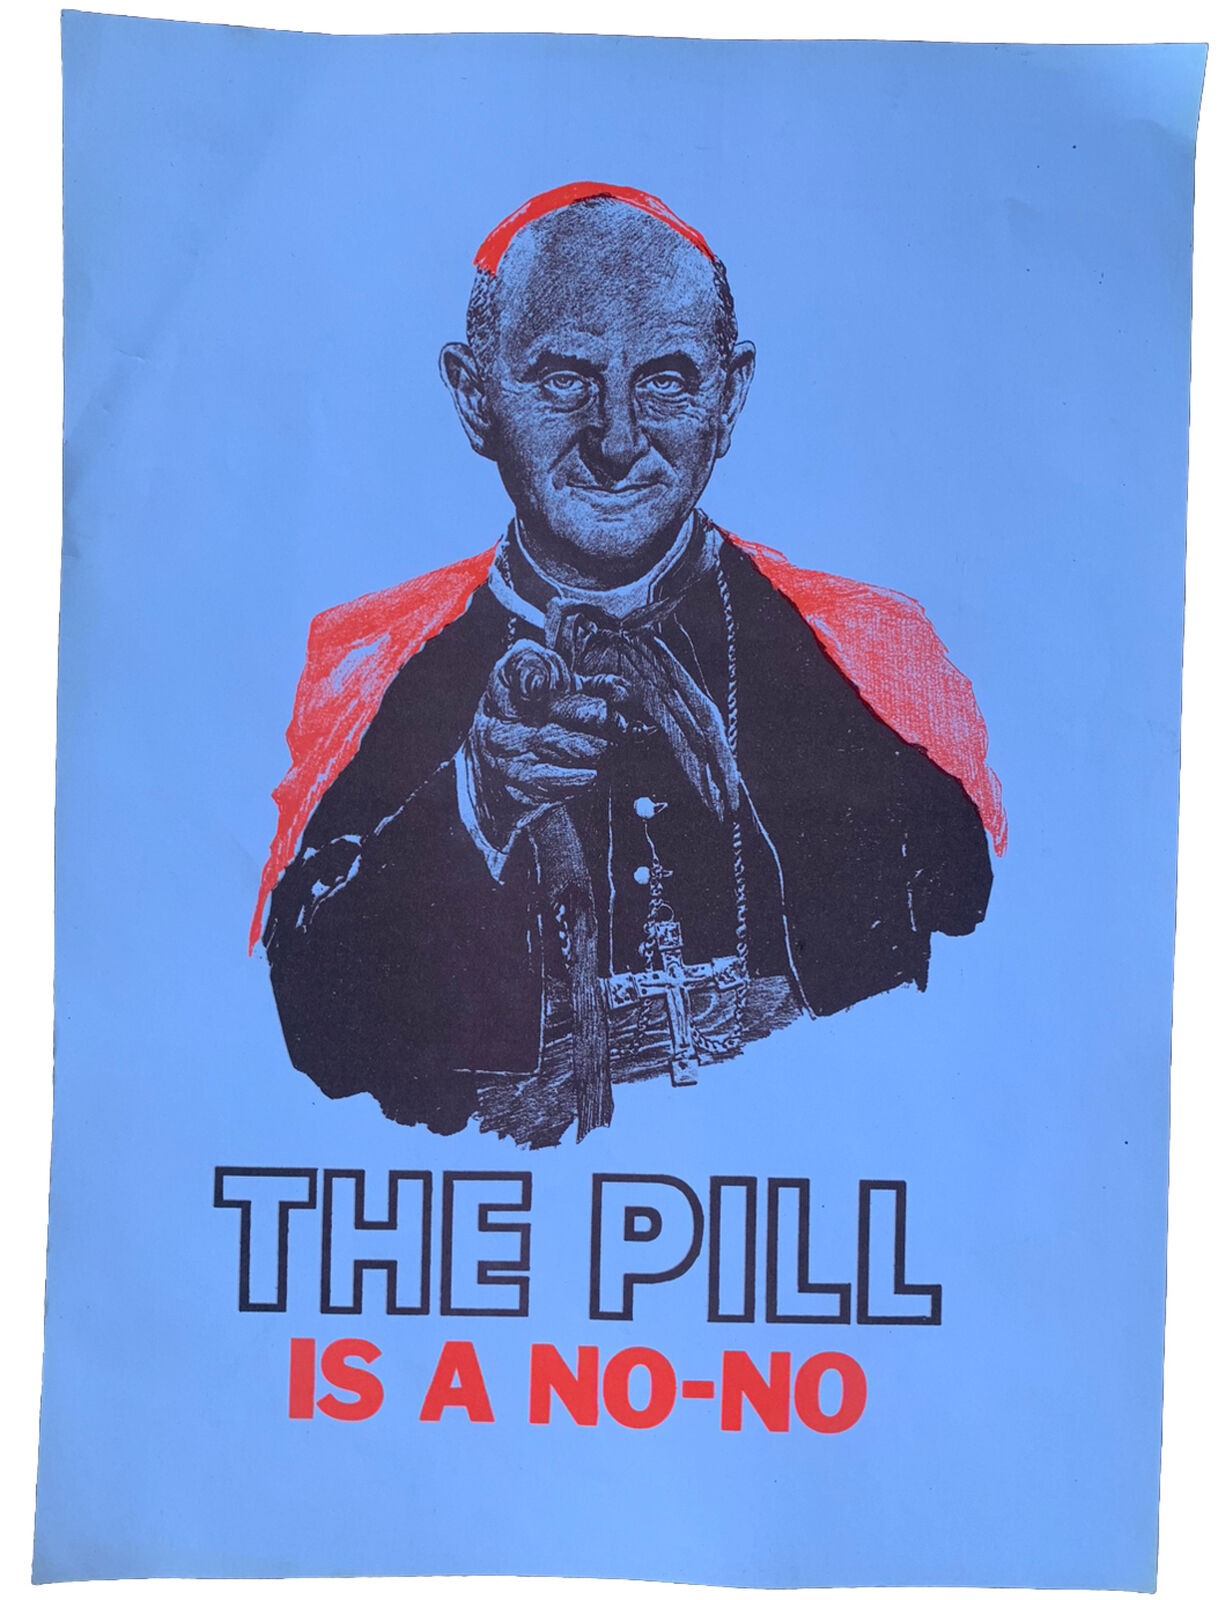 The Pope The Pill Is A No No Vintage 1960's ORIGINAL 10.5